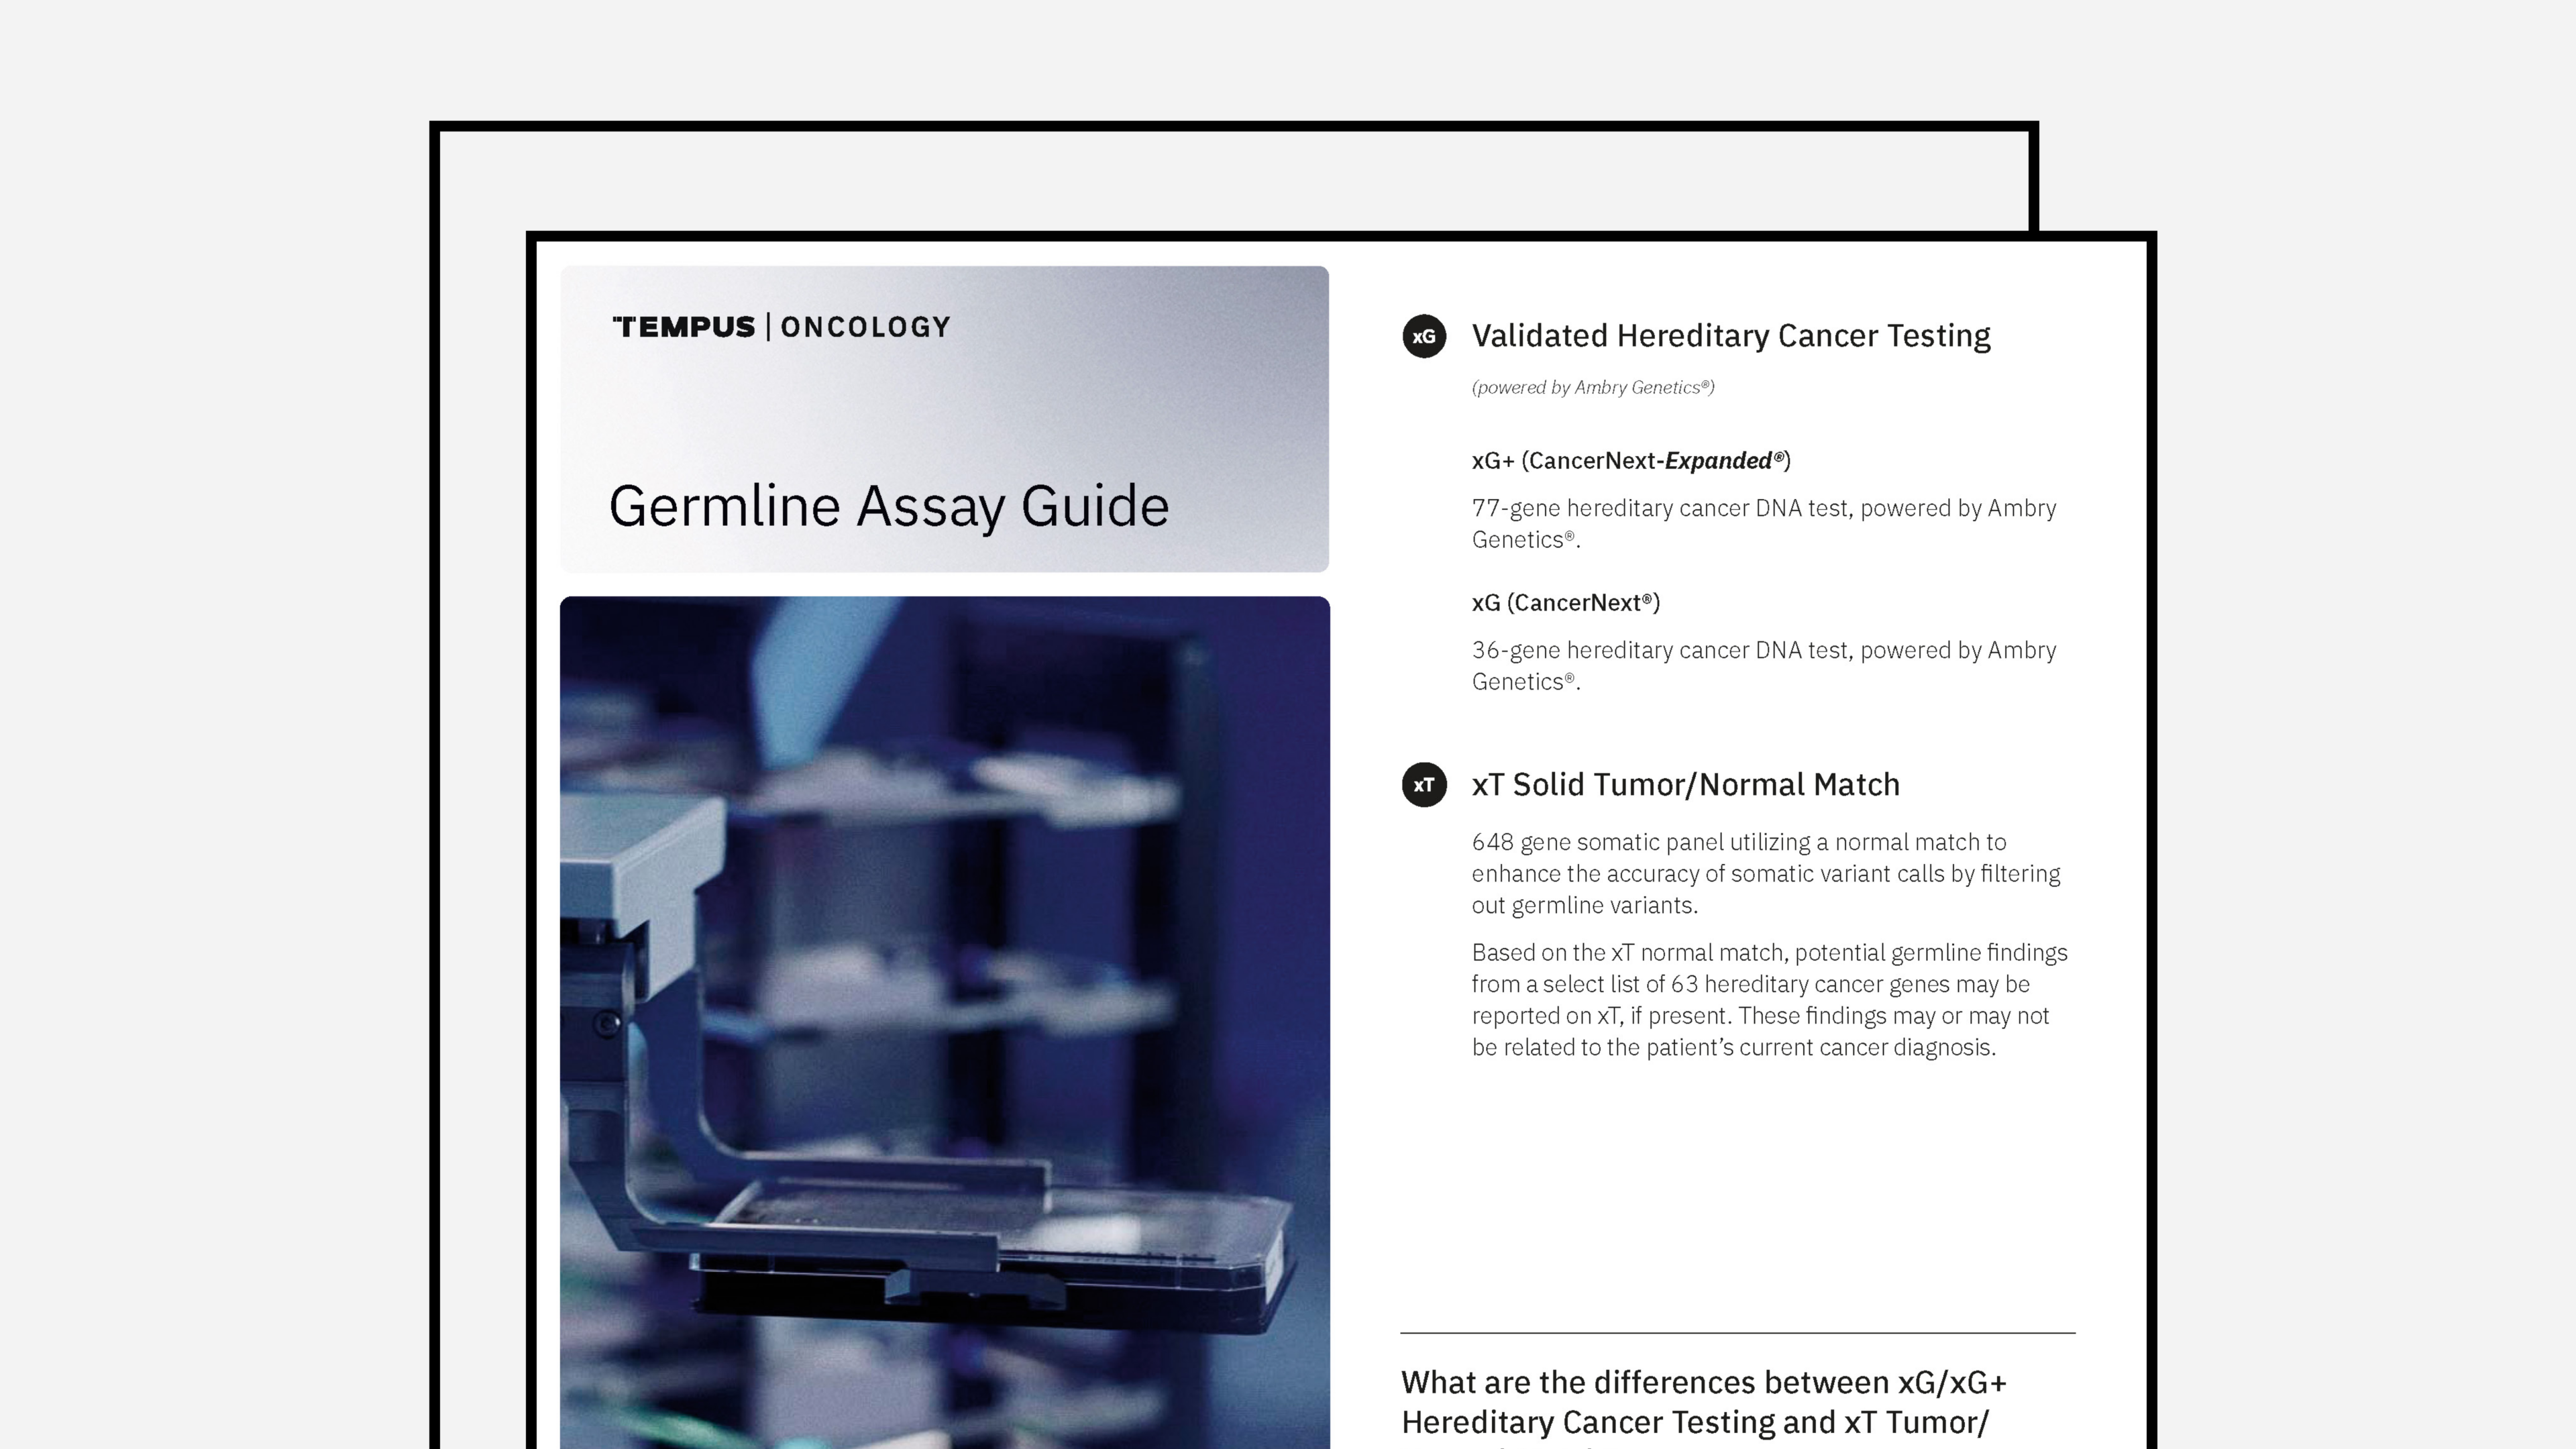 Germline Assay Guide (Ambry)